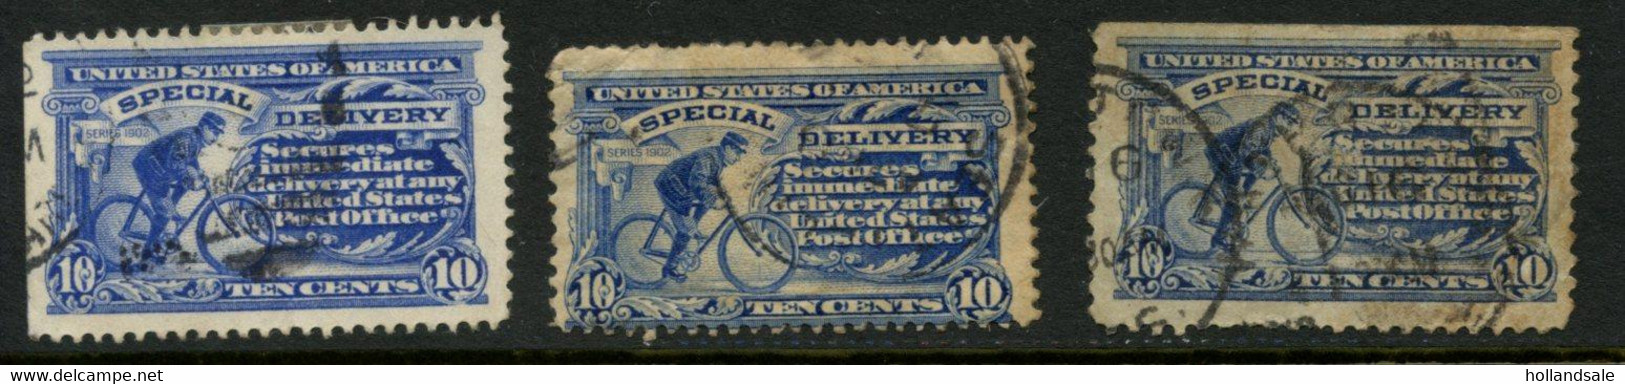 U.S.A. - 1902  5c SPECIAL DELIVERY Stamps. Three (3) Stamps. One Smaller, One Imperf At Top. All Used. SCOTT # E6 - Special Delivery, Registration & Certified